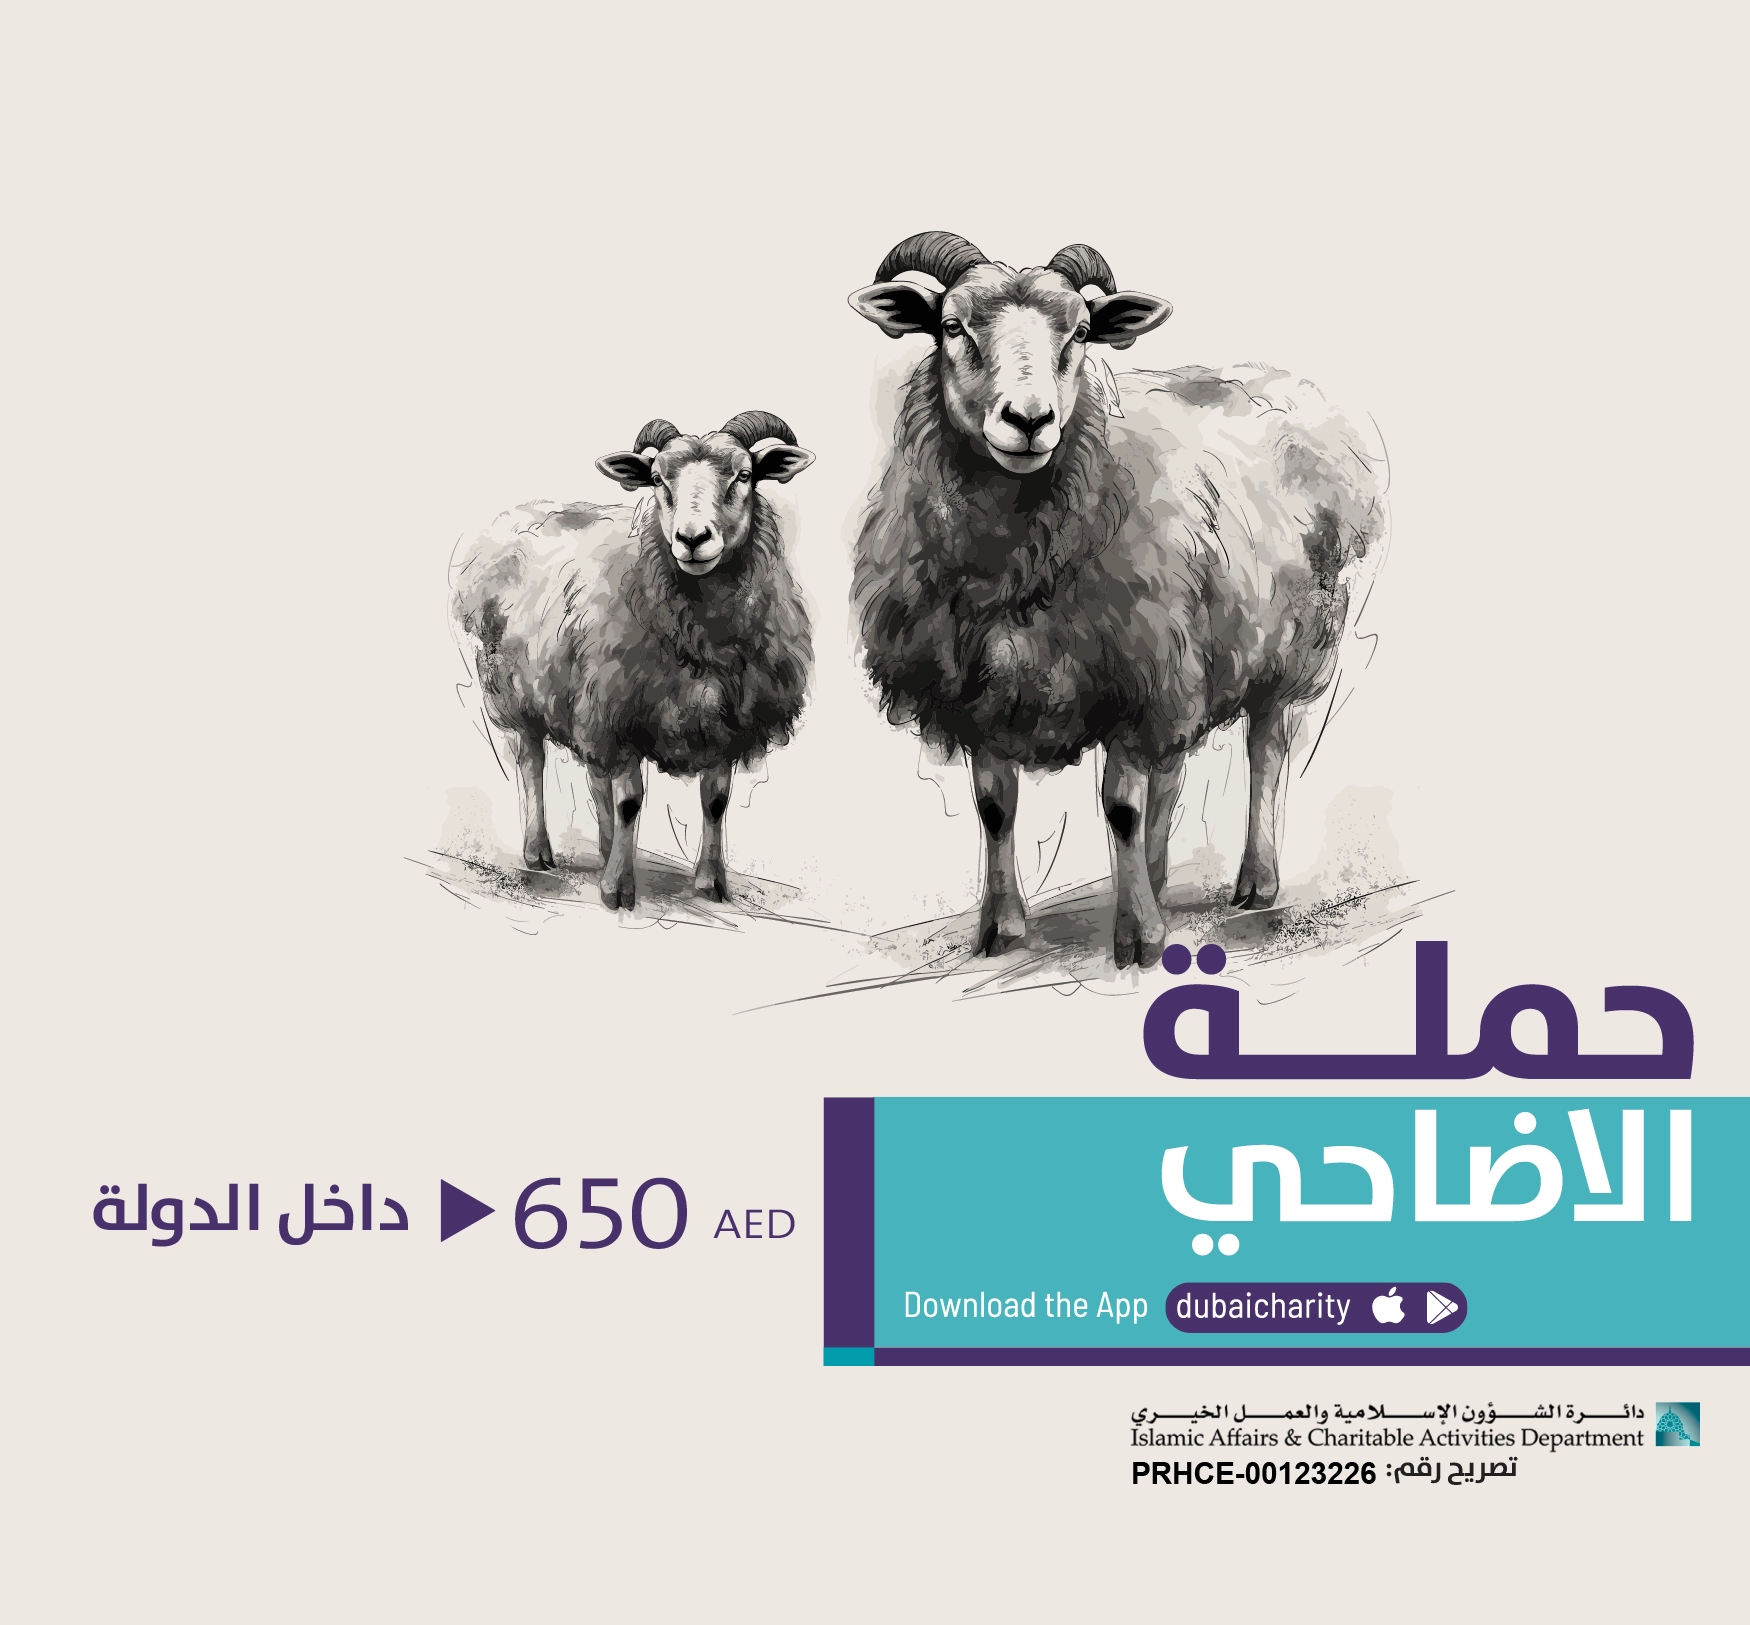 Sacrifice Inside The Country 650 AED